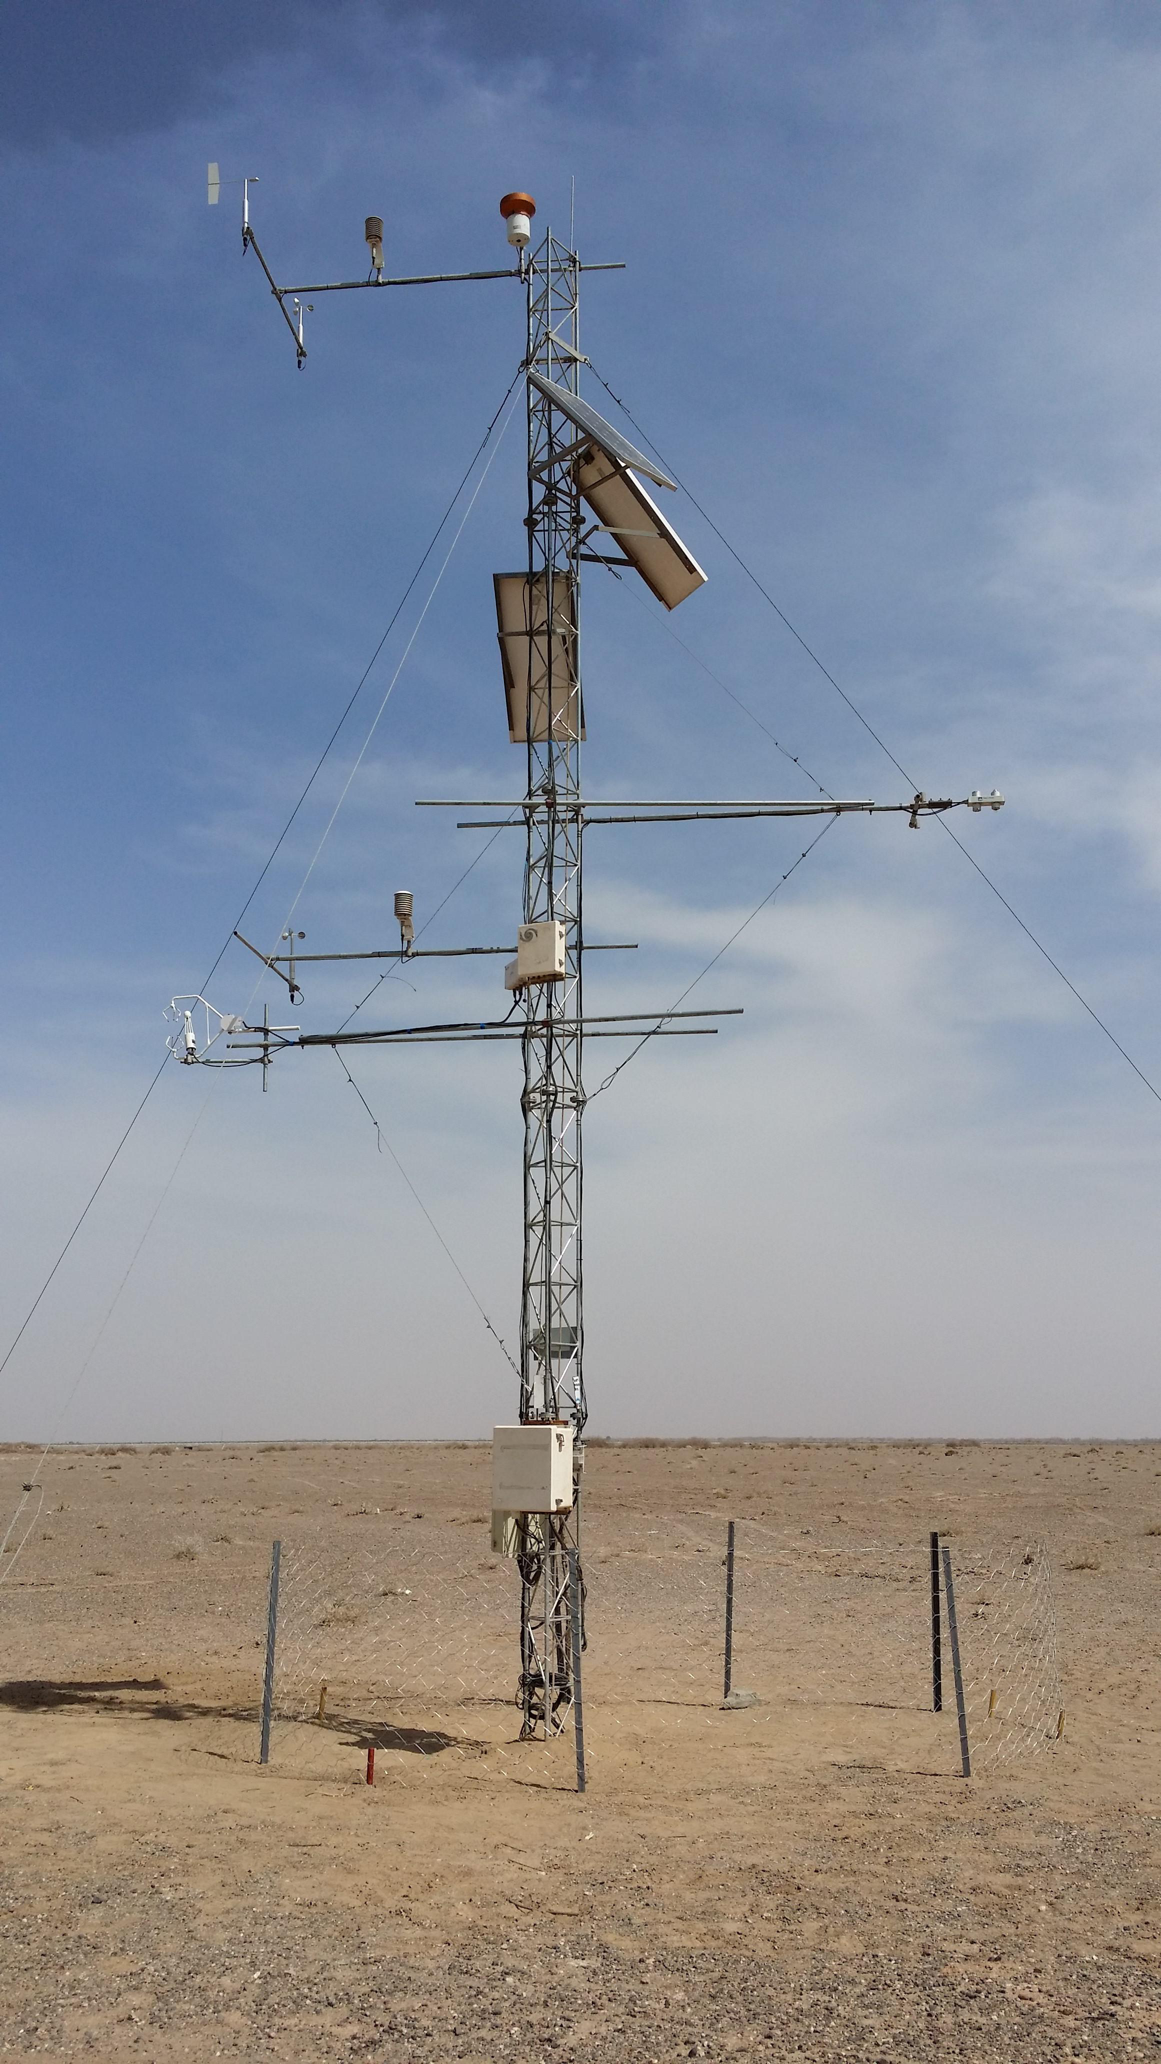 Qilian Mountains integrated observatory network: Dataset of Heihe integrated observatory network (eddy covariance system of desert station, 2019)